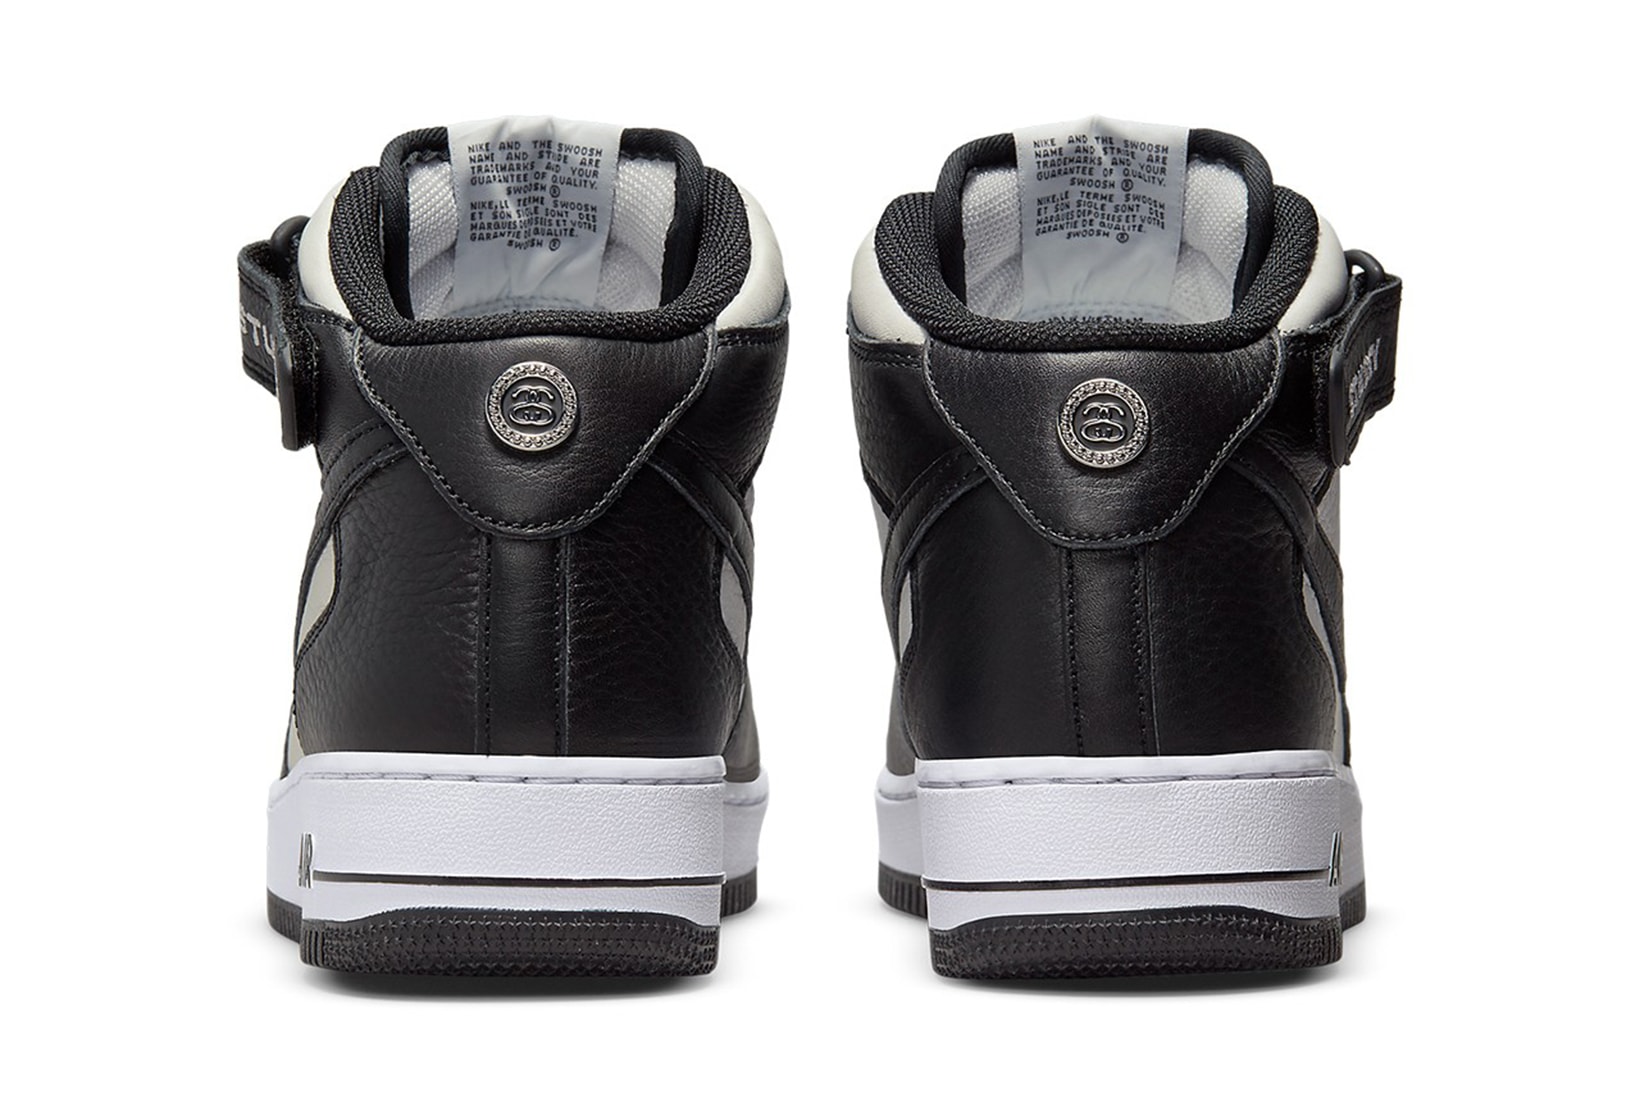 Stüssy Nike Air Force 1 Mid Sneakers Black White Posterior View